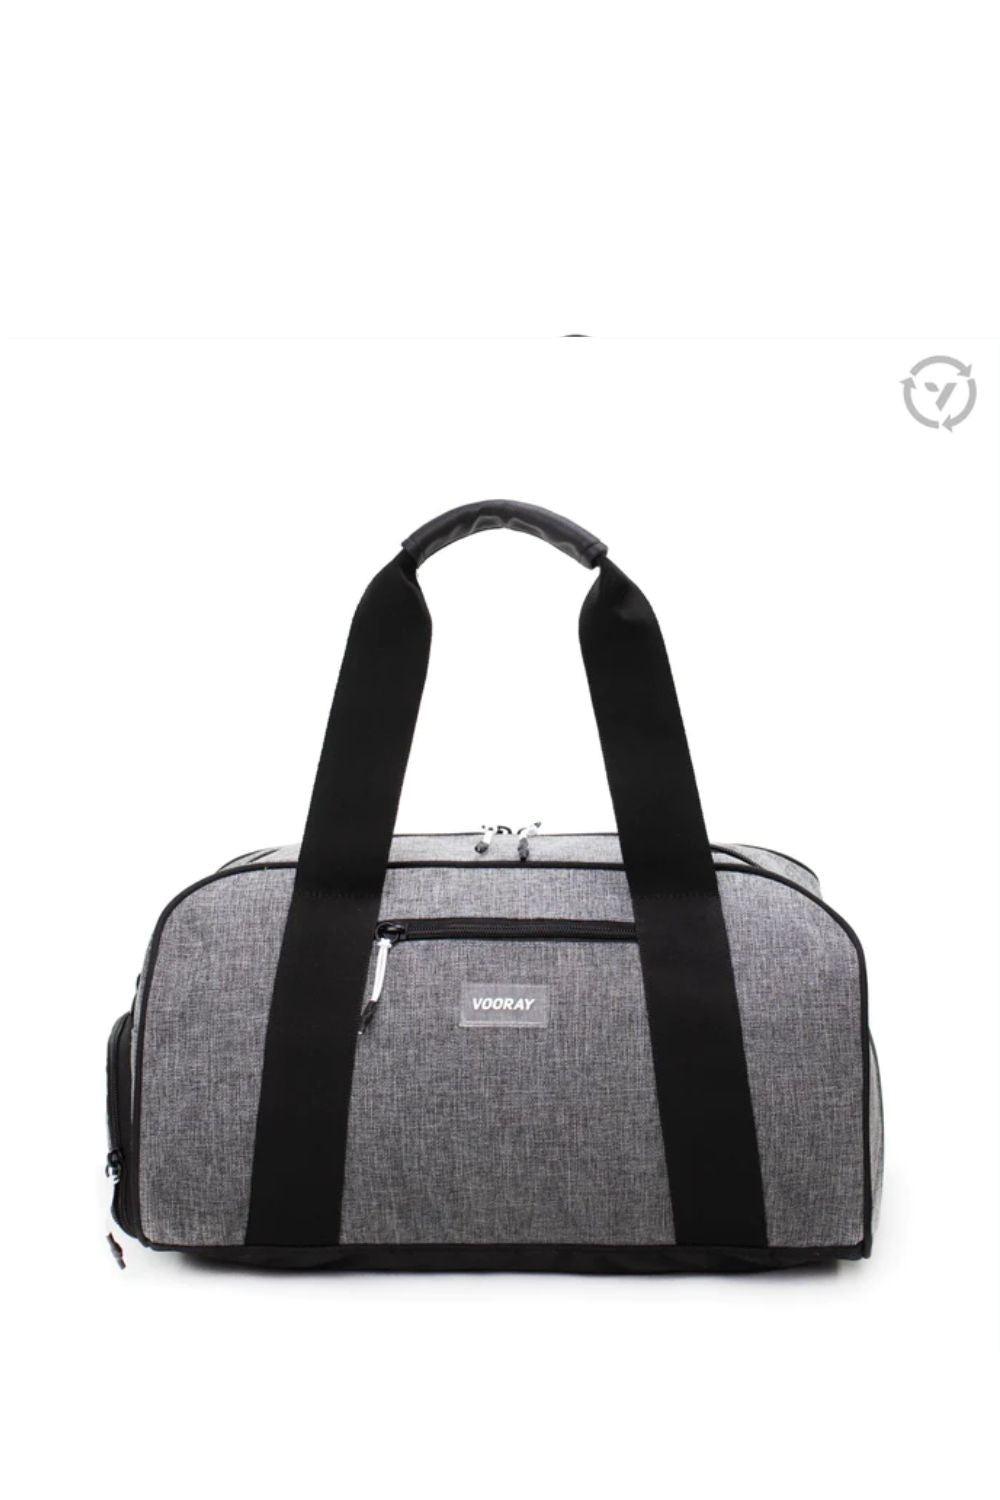 Vooray Burner Gym Duffel - Recycled Fossil